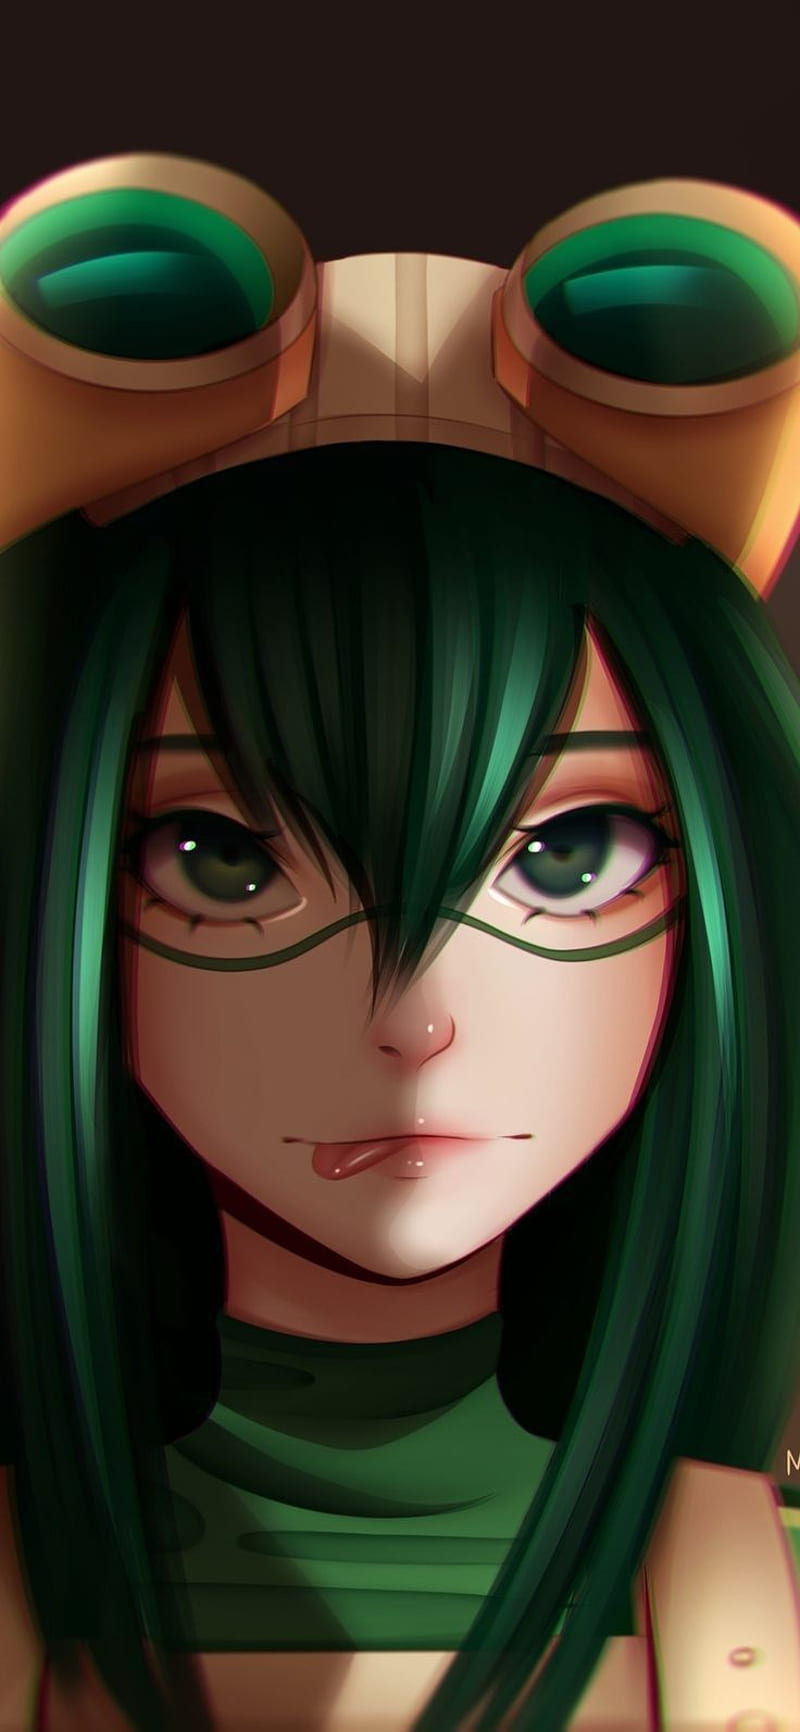 Tsuyu Asui Froppy Wallpapers Download